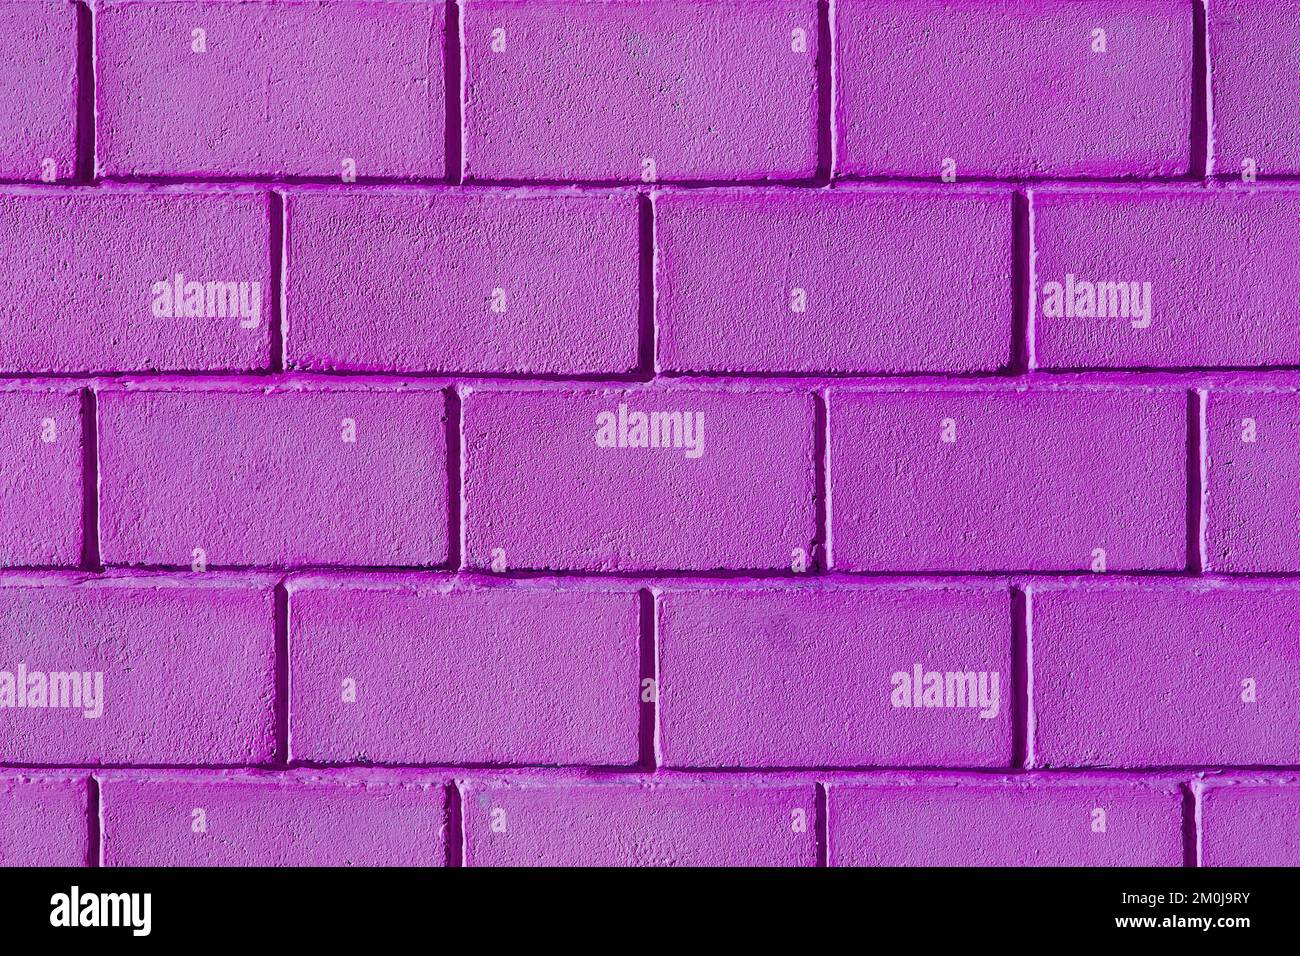 Purple pink lilac color paint wall brick blocks exterior facade texture background home abstract house. Stock Photo